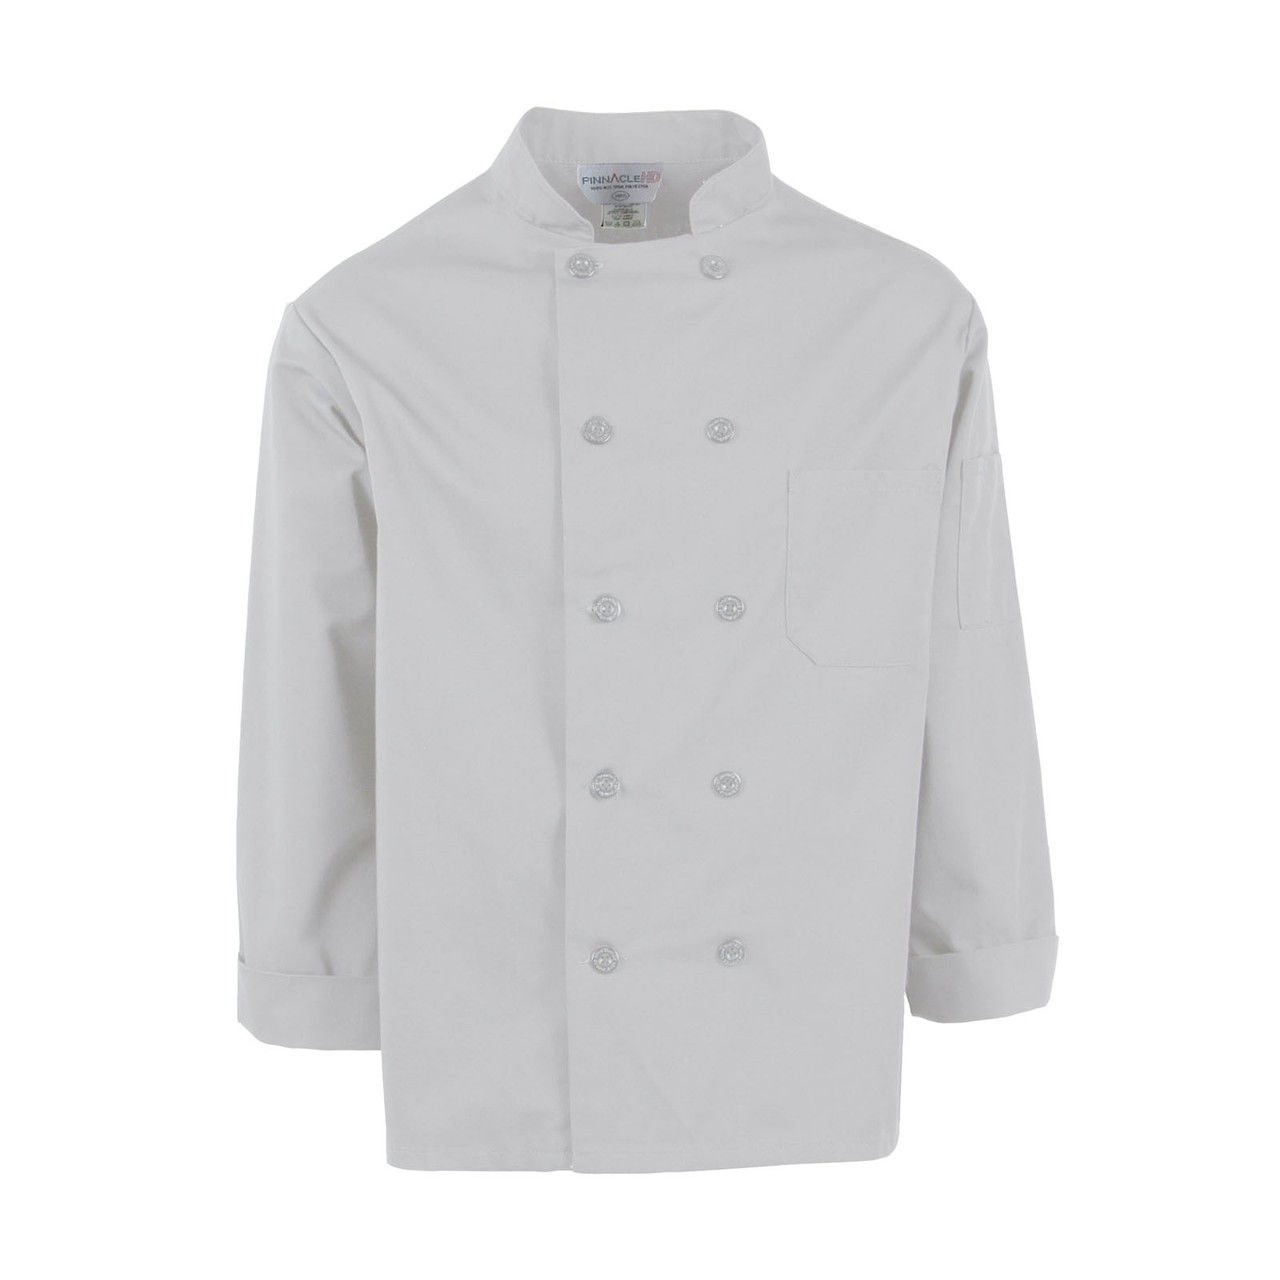 Is the white chef coat made of a comfortable material?